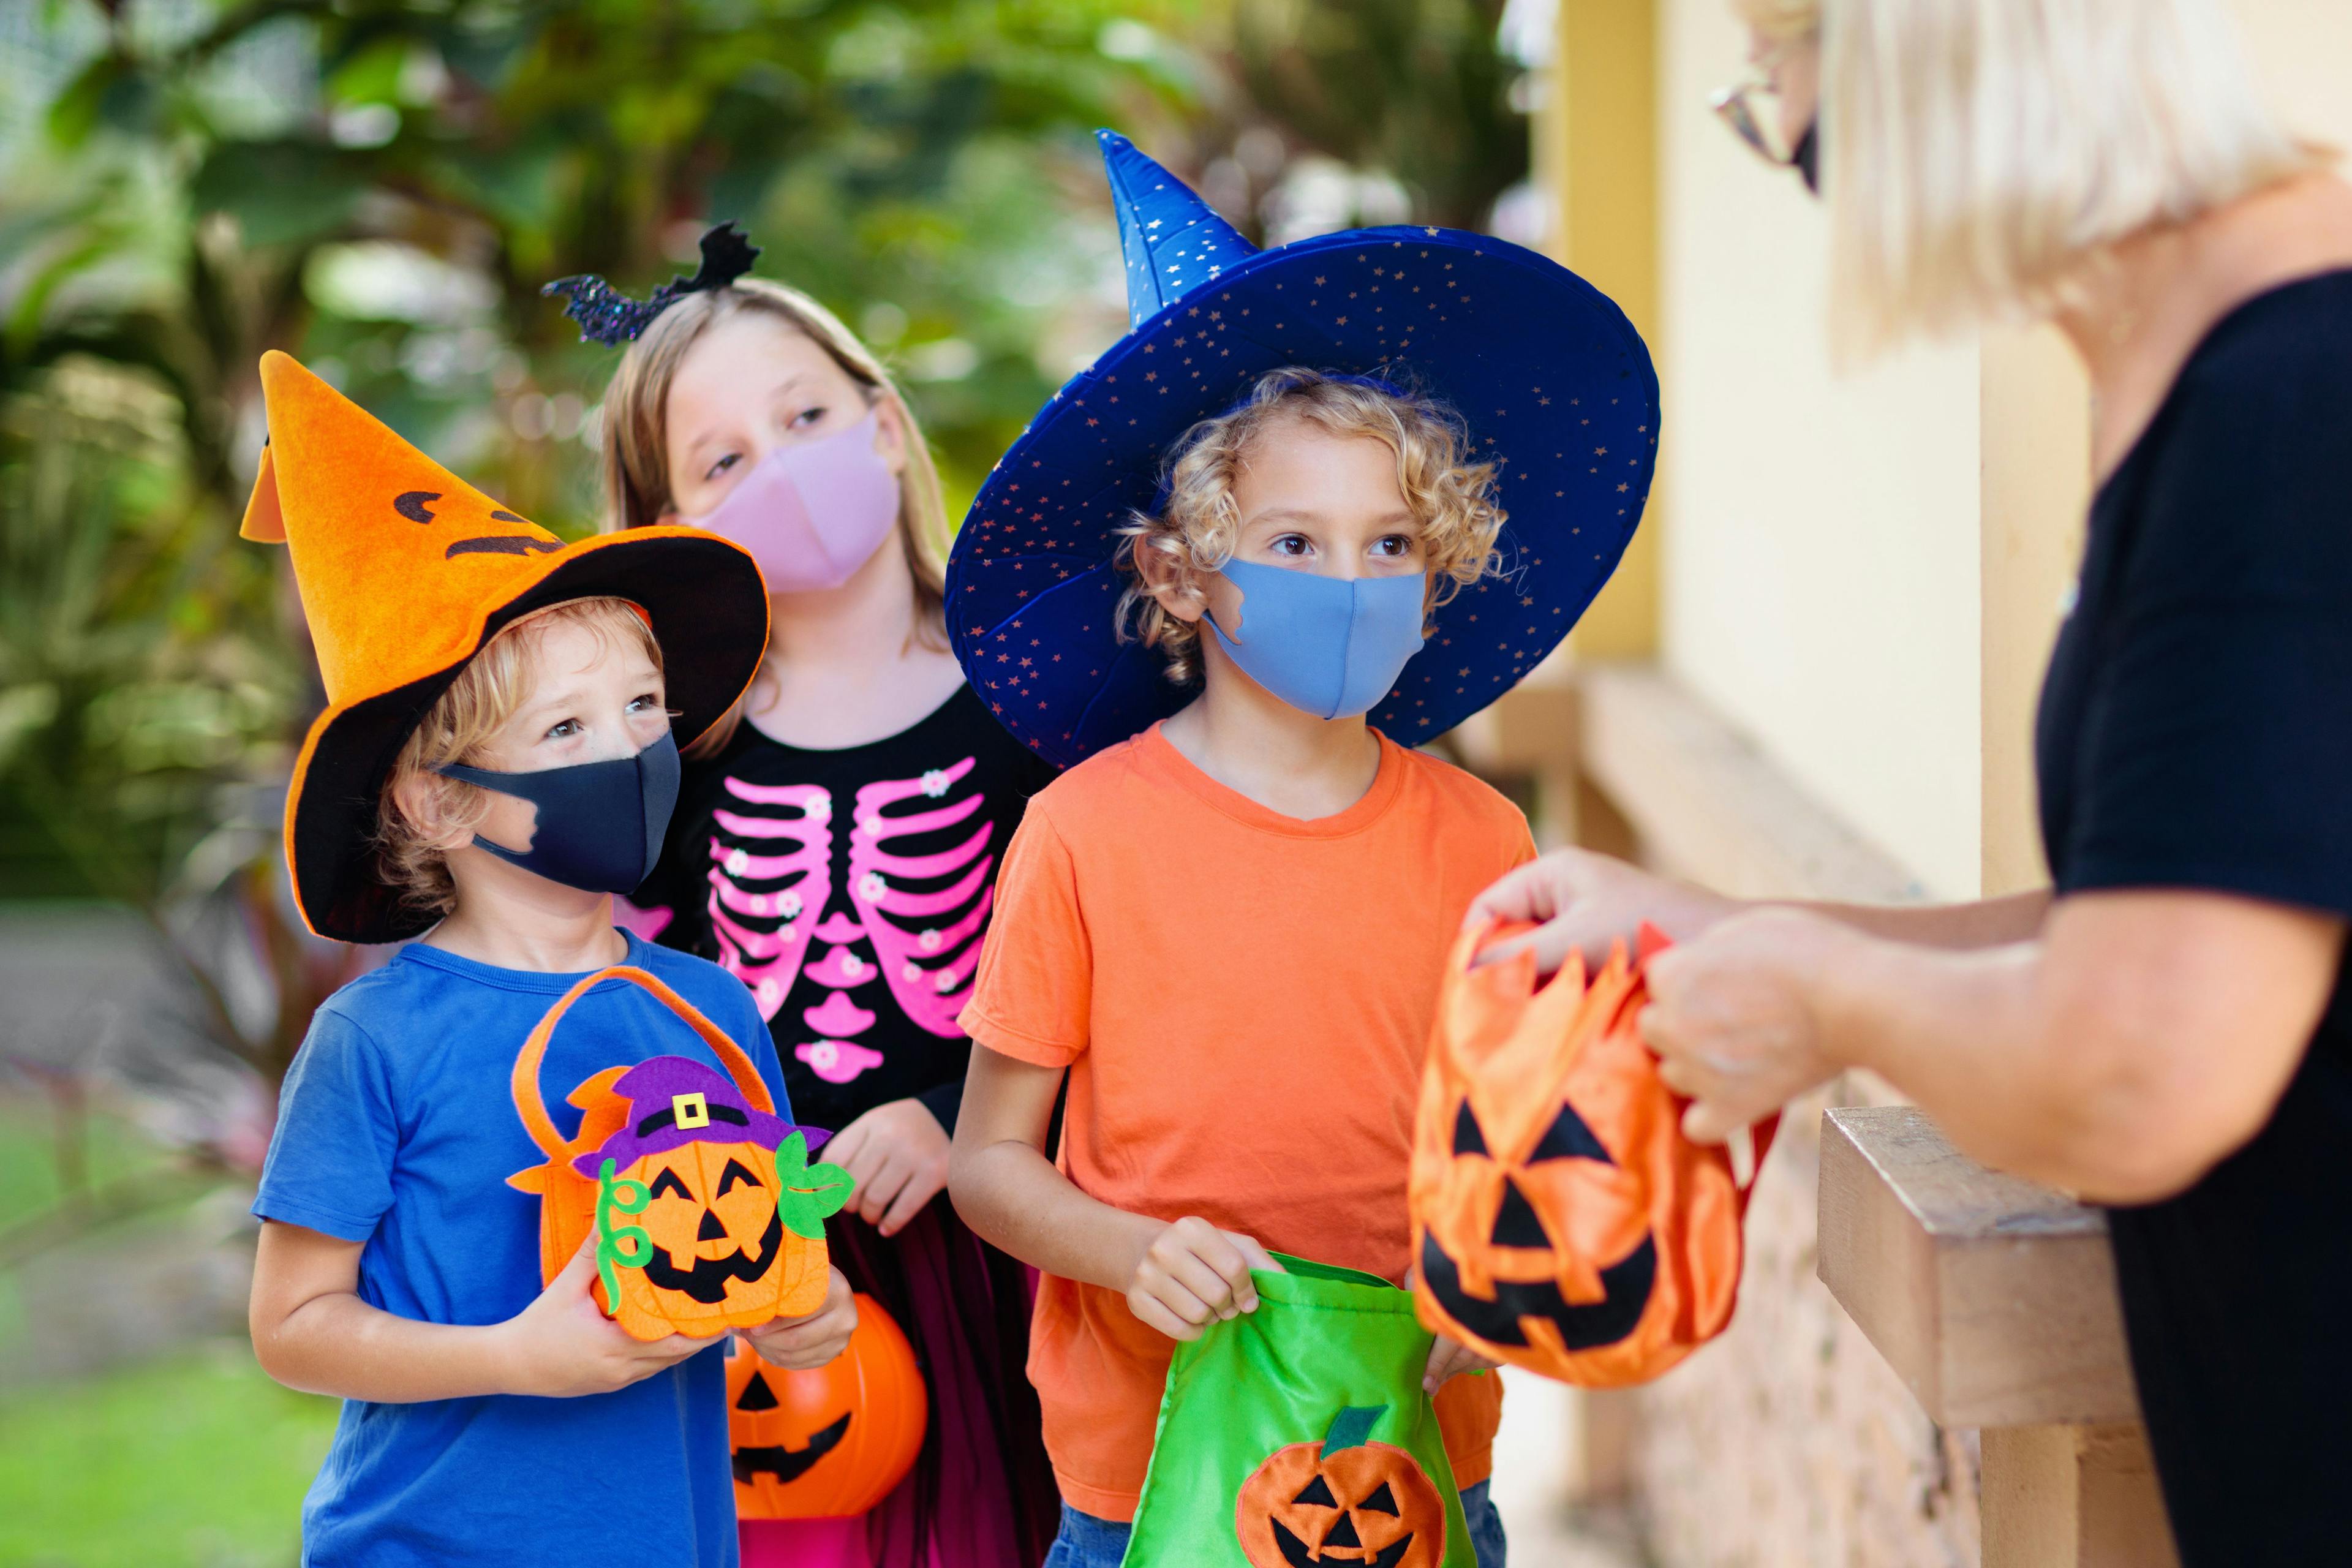 Do you plan to hand out candy to trick or treaters this Halloween, during the pandemic?